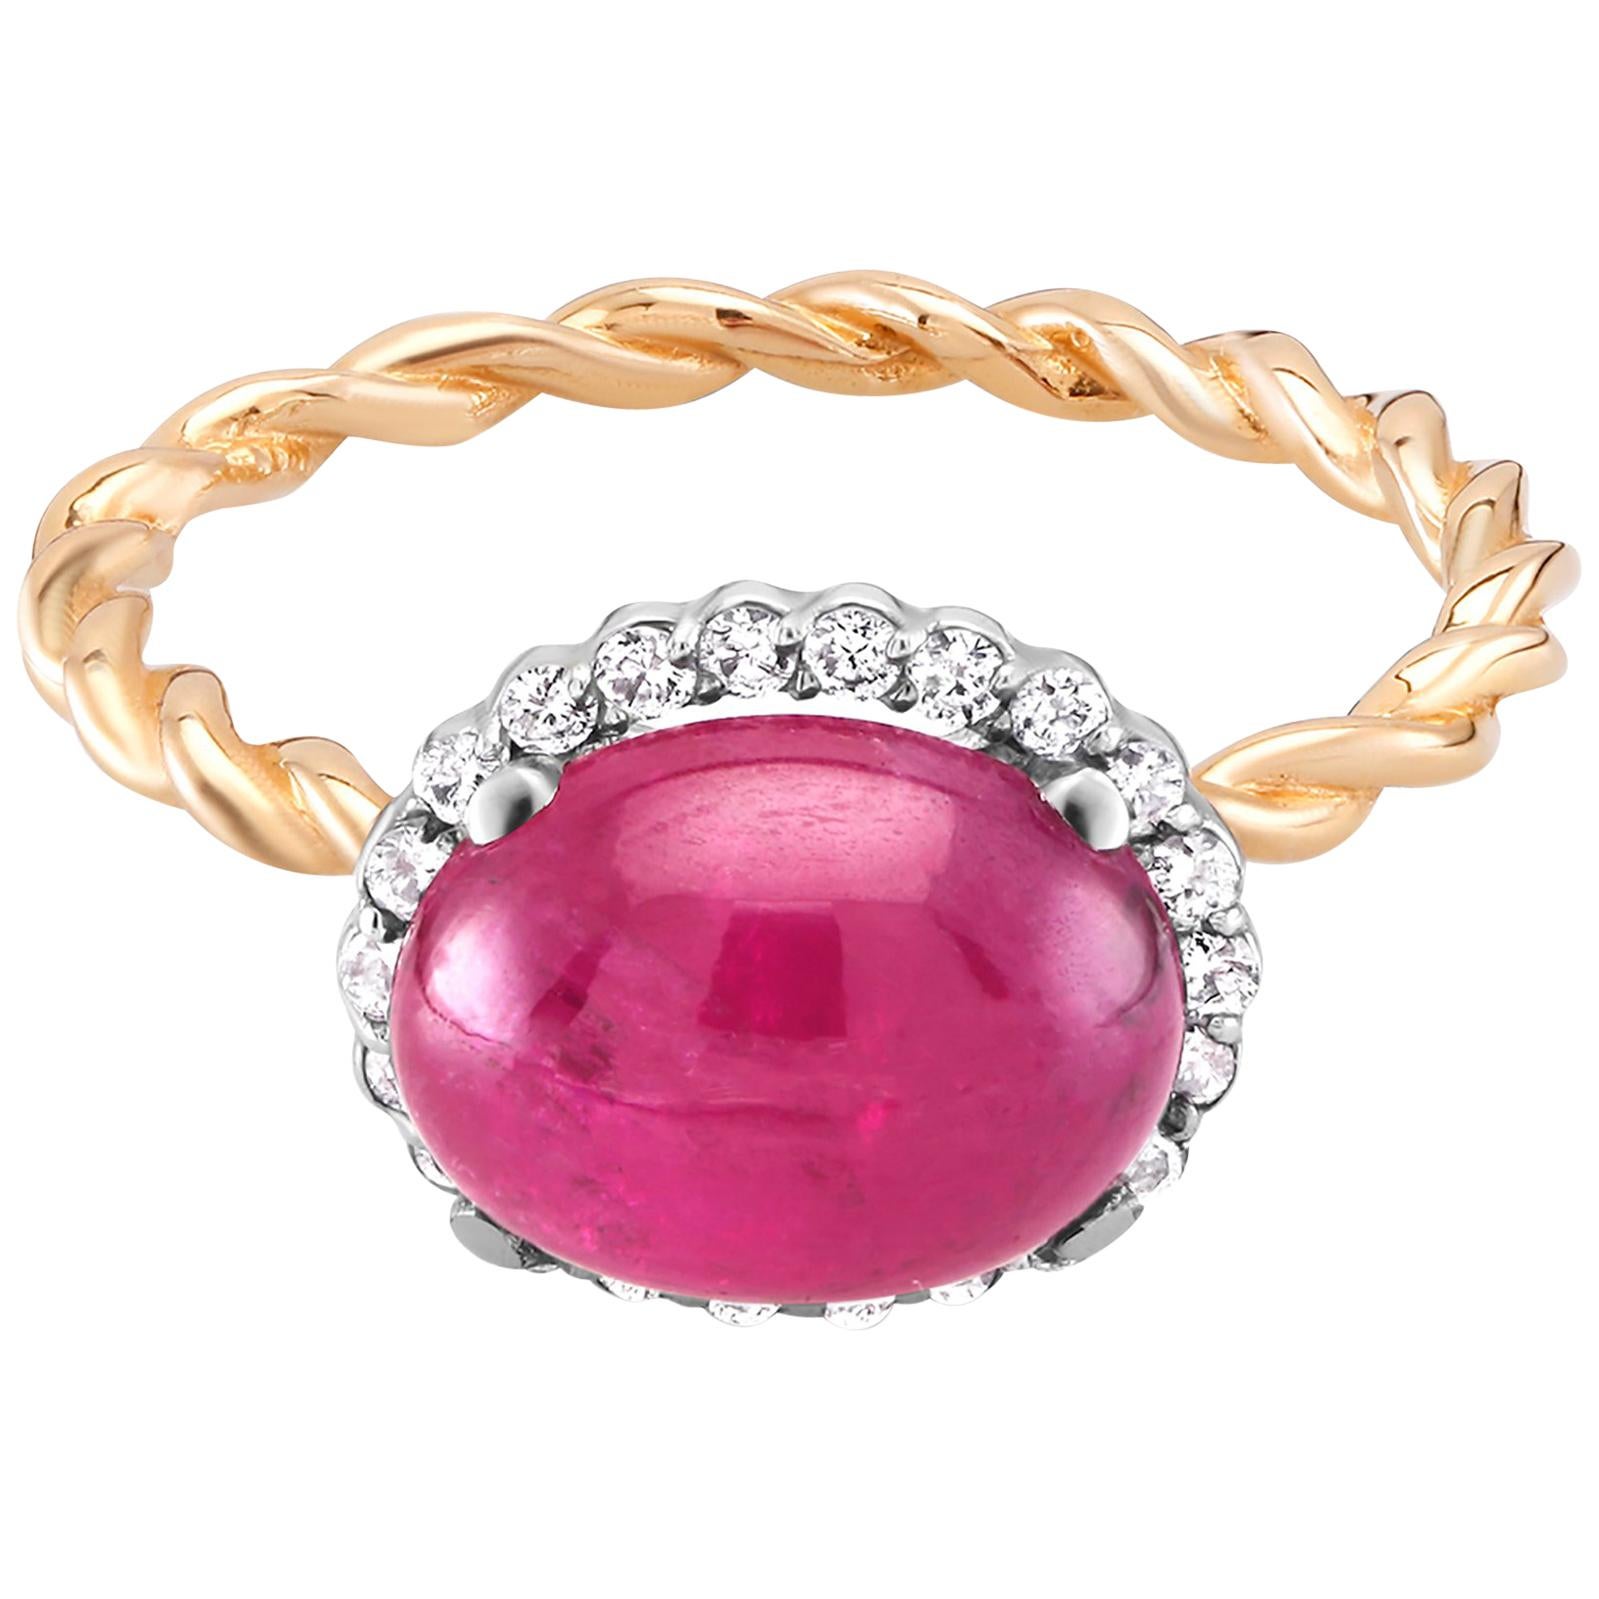 Cabochon Ruby and Diamond White and Rose Gold Cocktail Ring